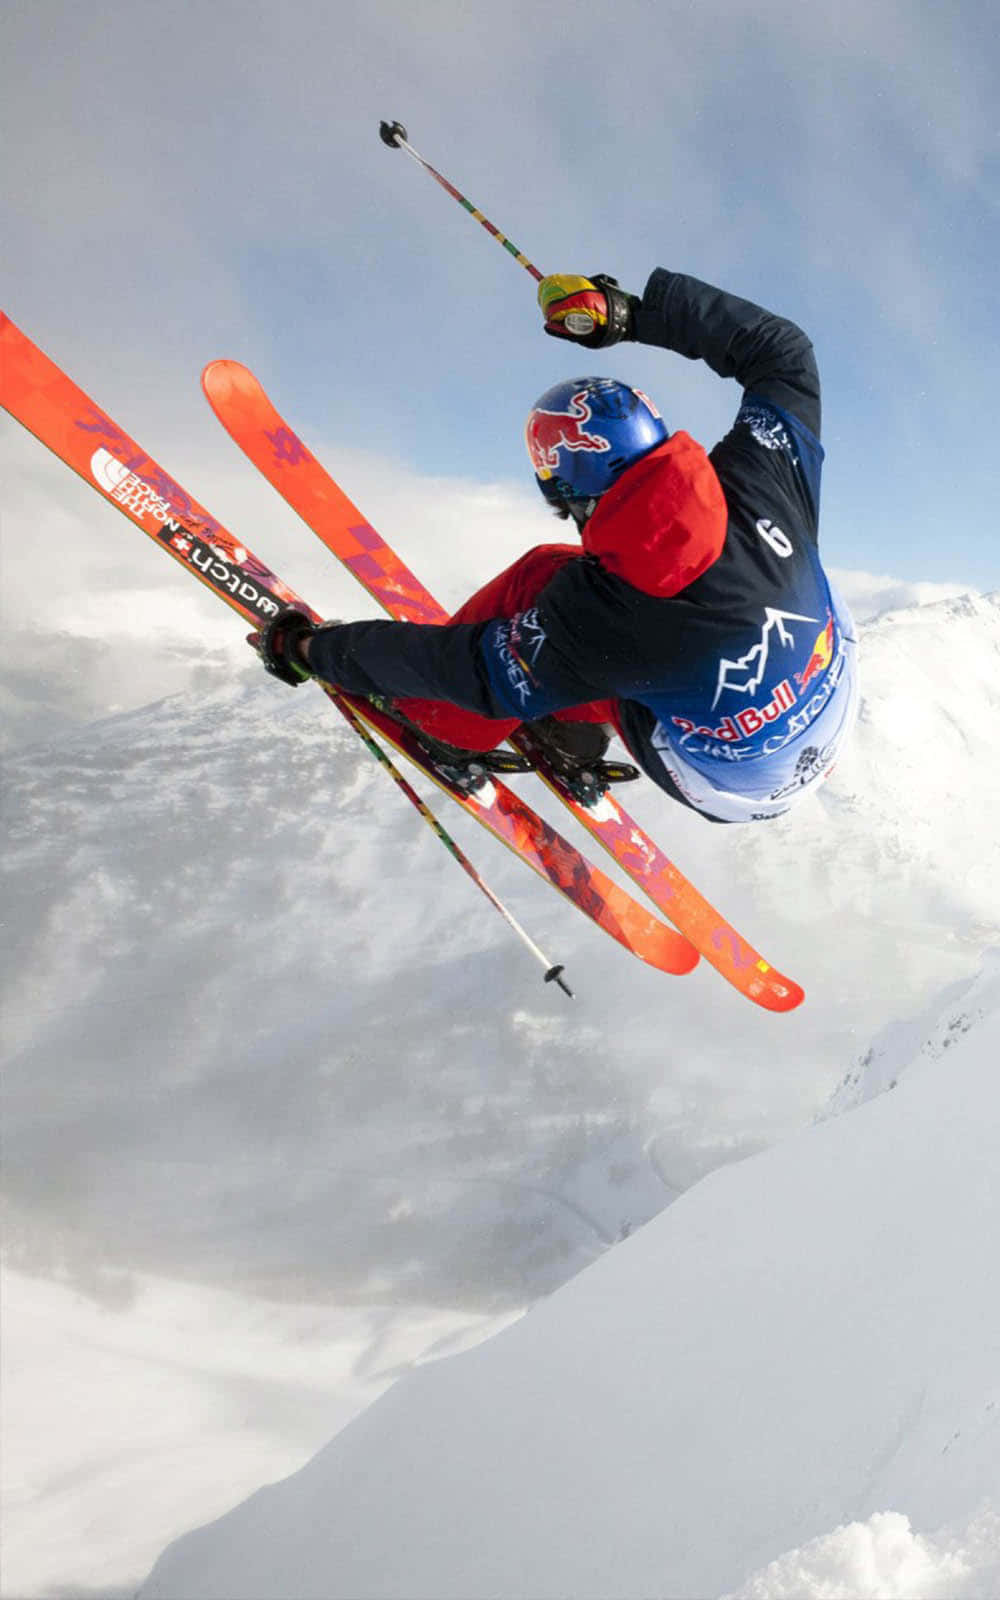 Captivating Skier Gliding Down a Snowy Mountain Slope